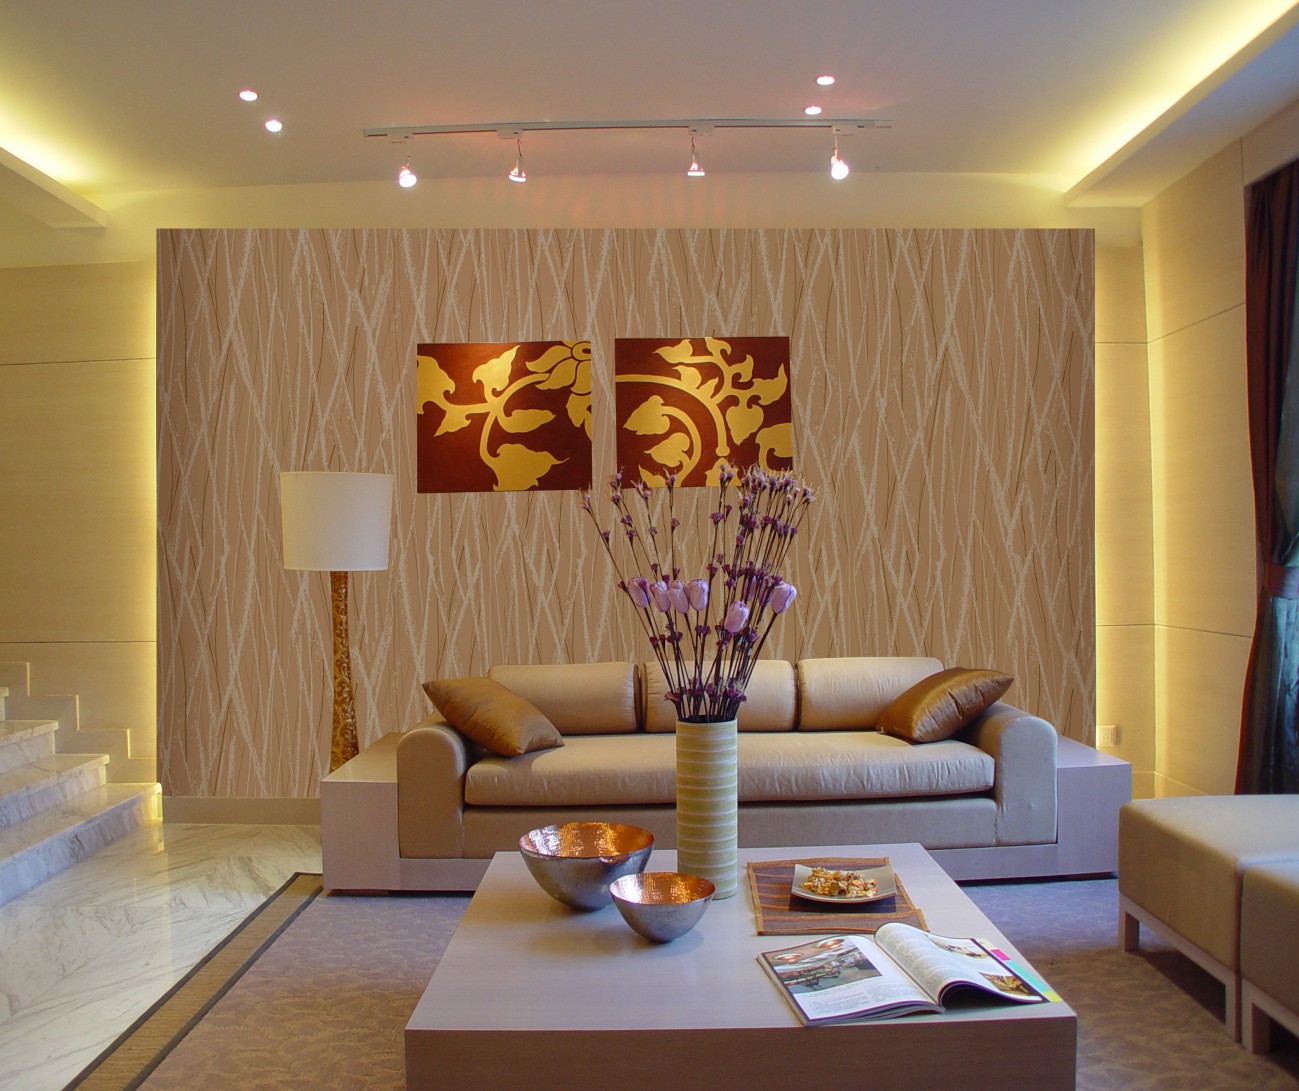 MAGNIFICENT-non-woven foaming sprinkled gold wallpaper